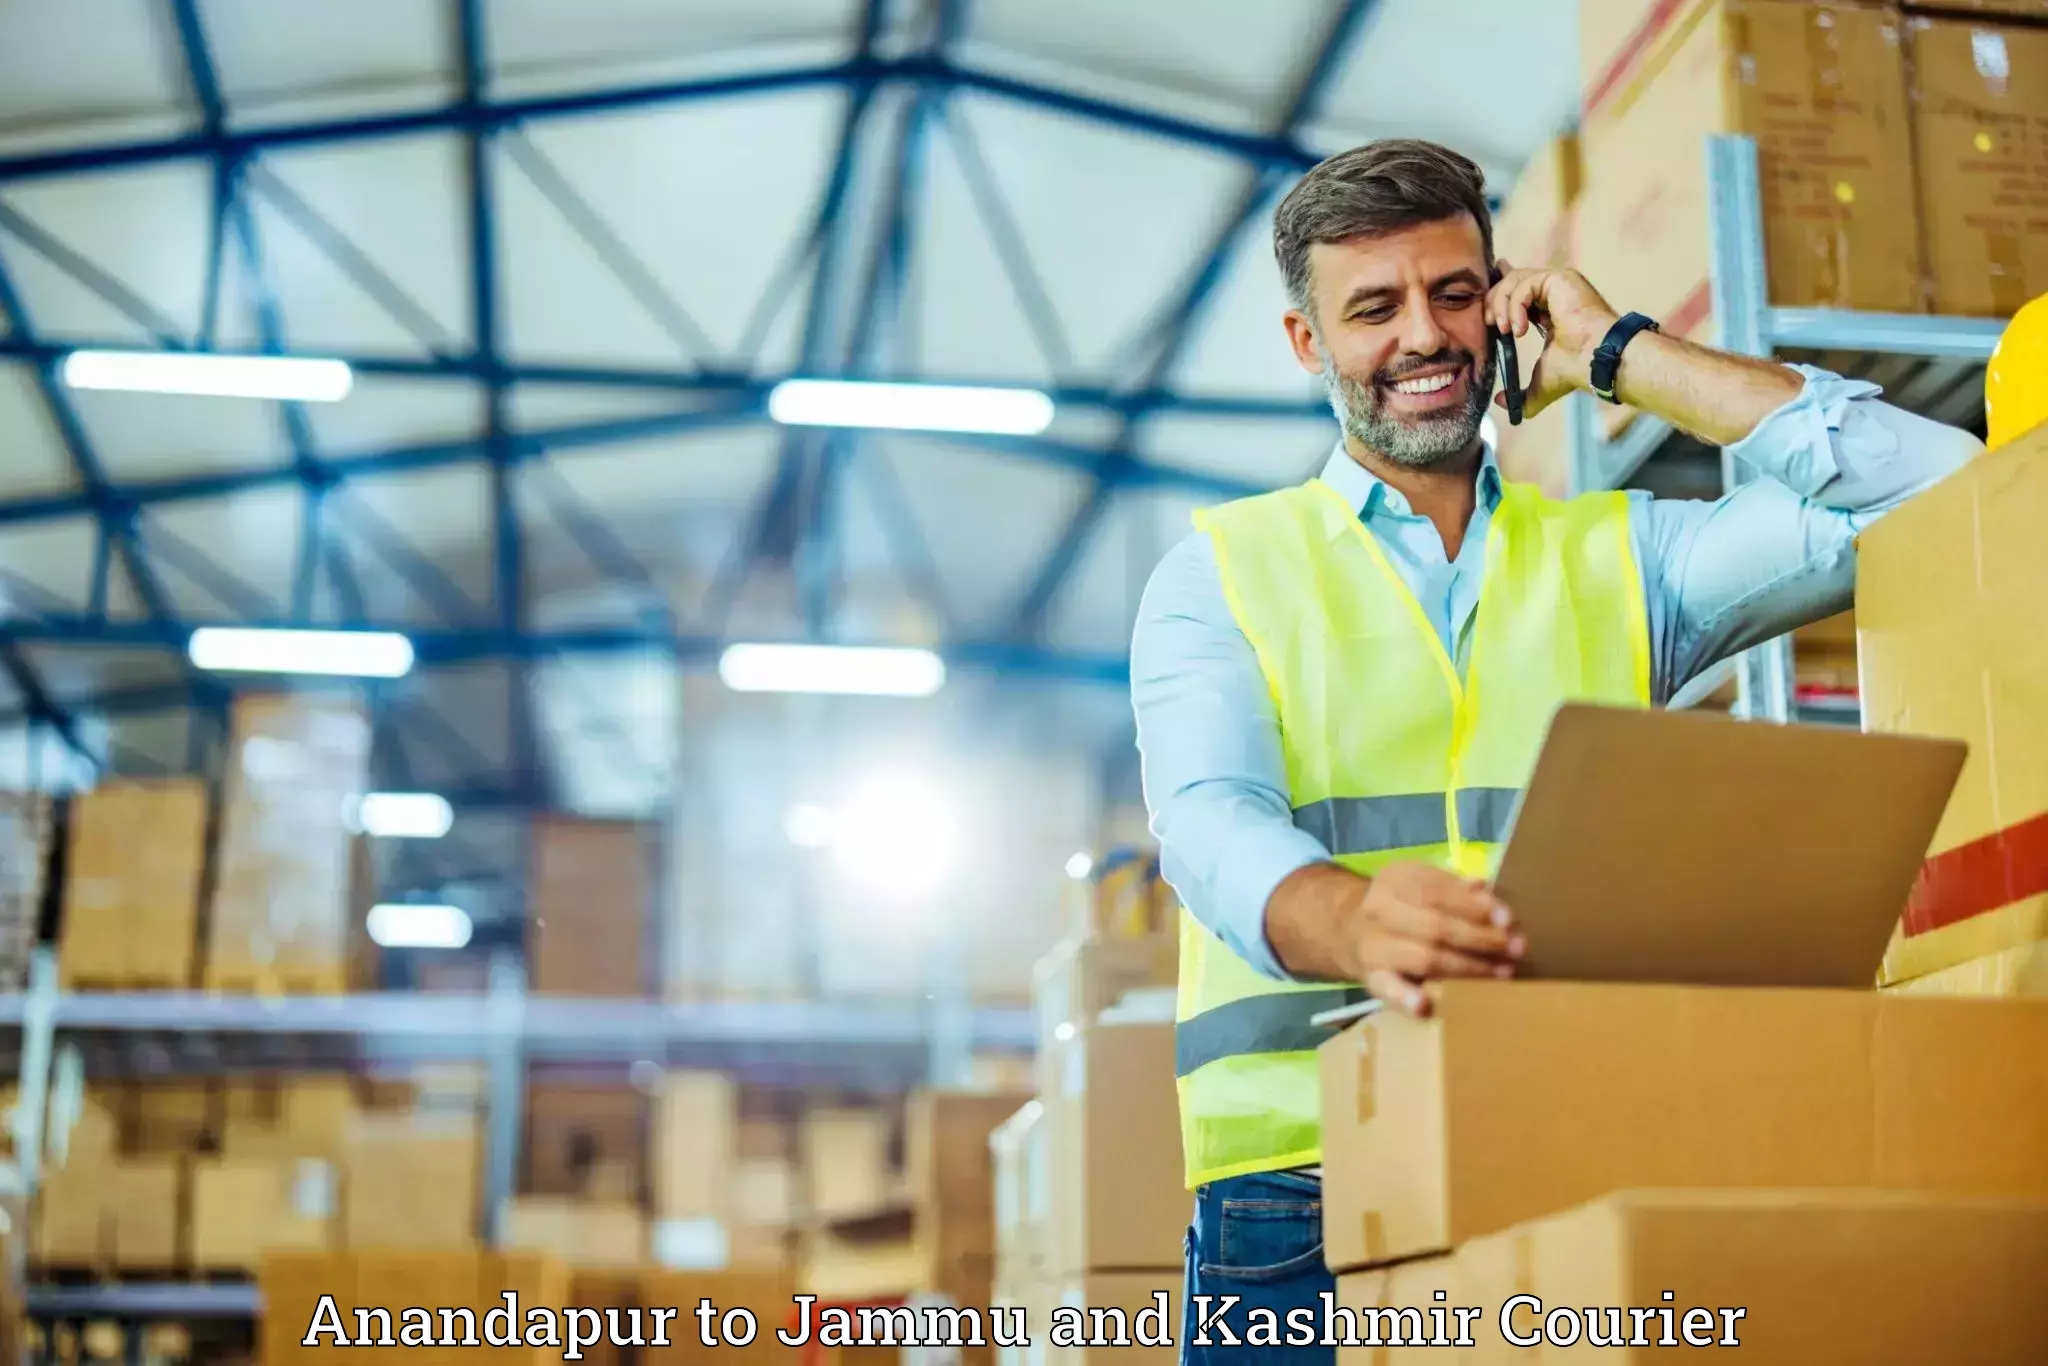 Tailored furniture transport in Anandapur to Jammu and Kashmir